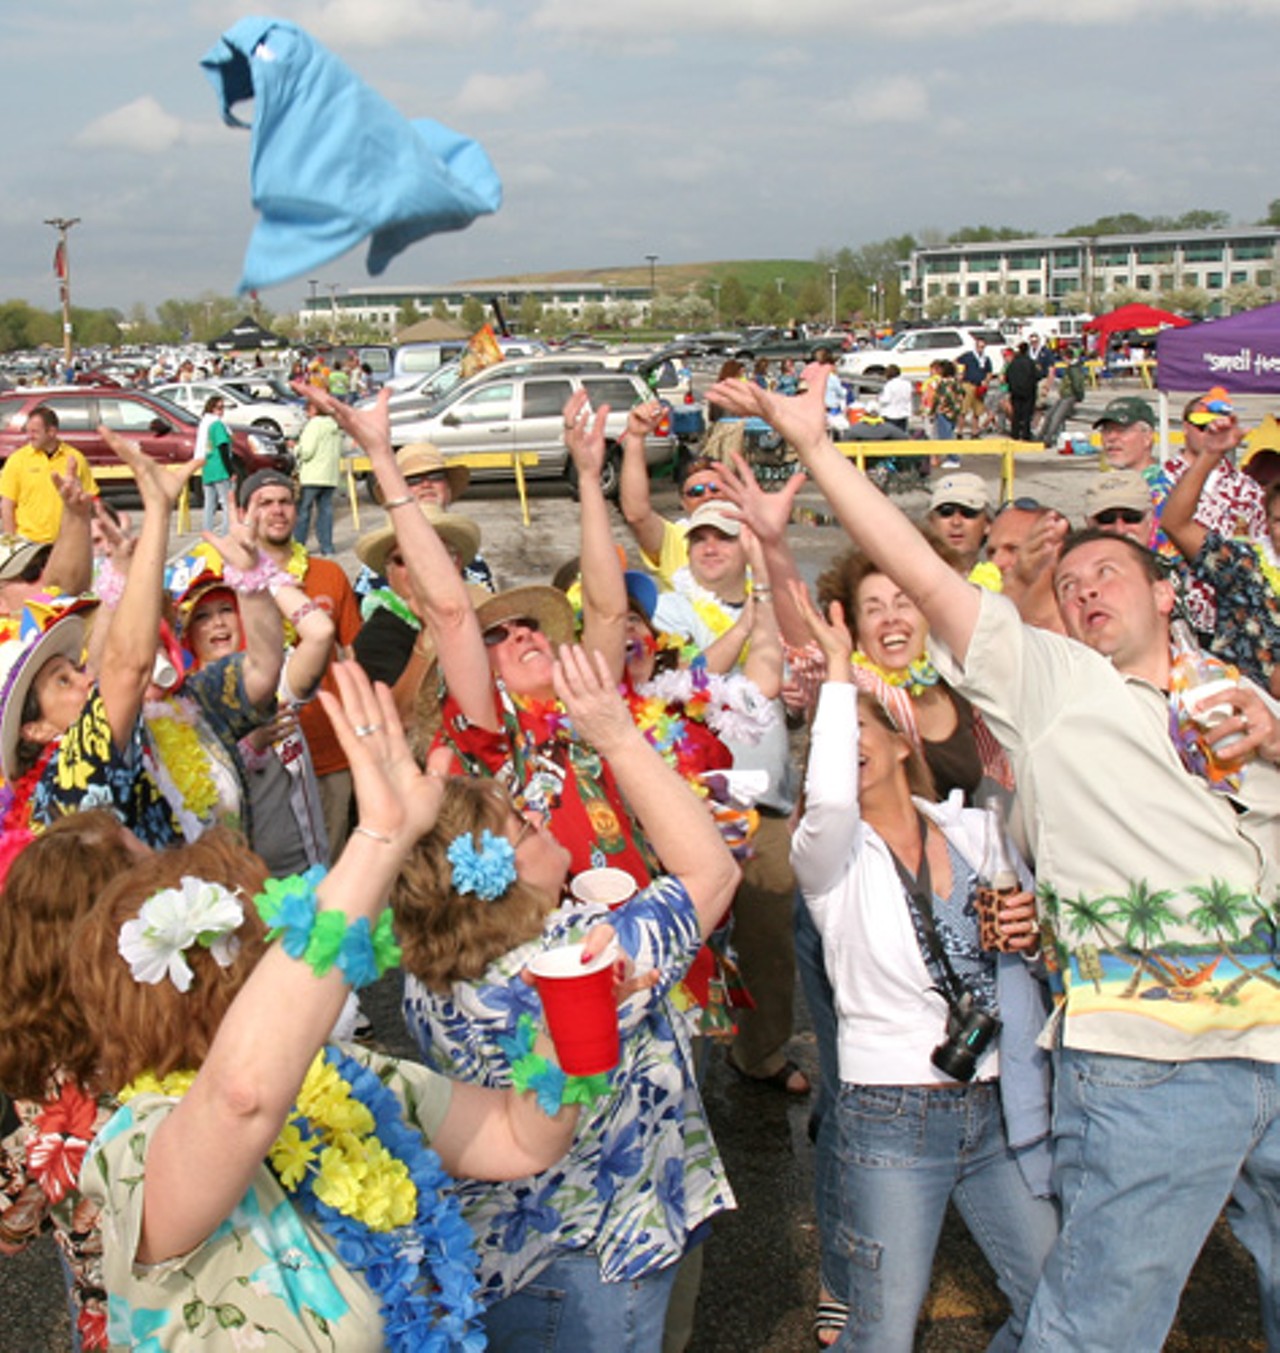 Margaritaville Express representatives toss T-shirts into the crowd.